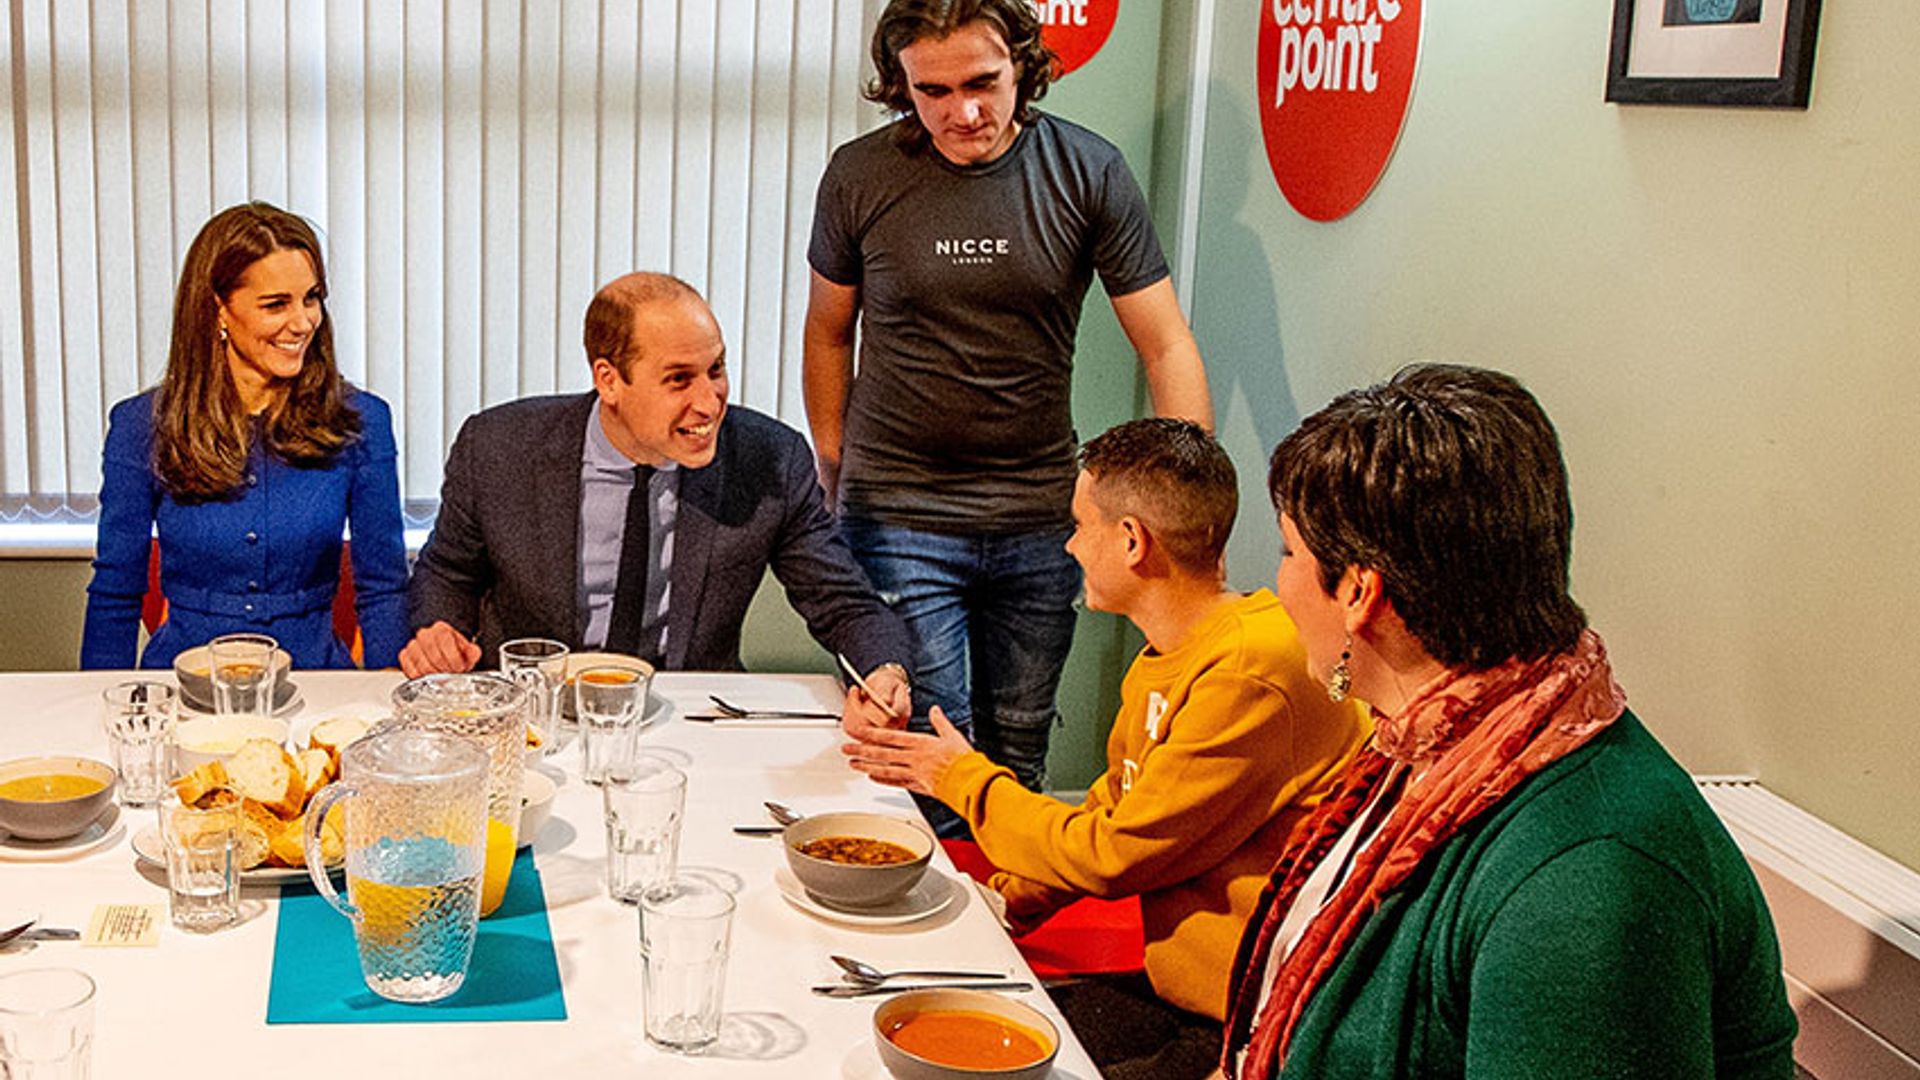 Prince William laughs at royal protocol with young dinner guests